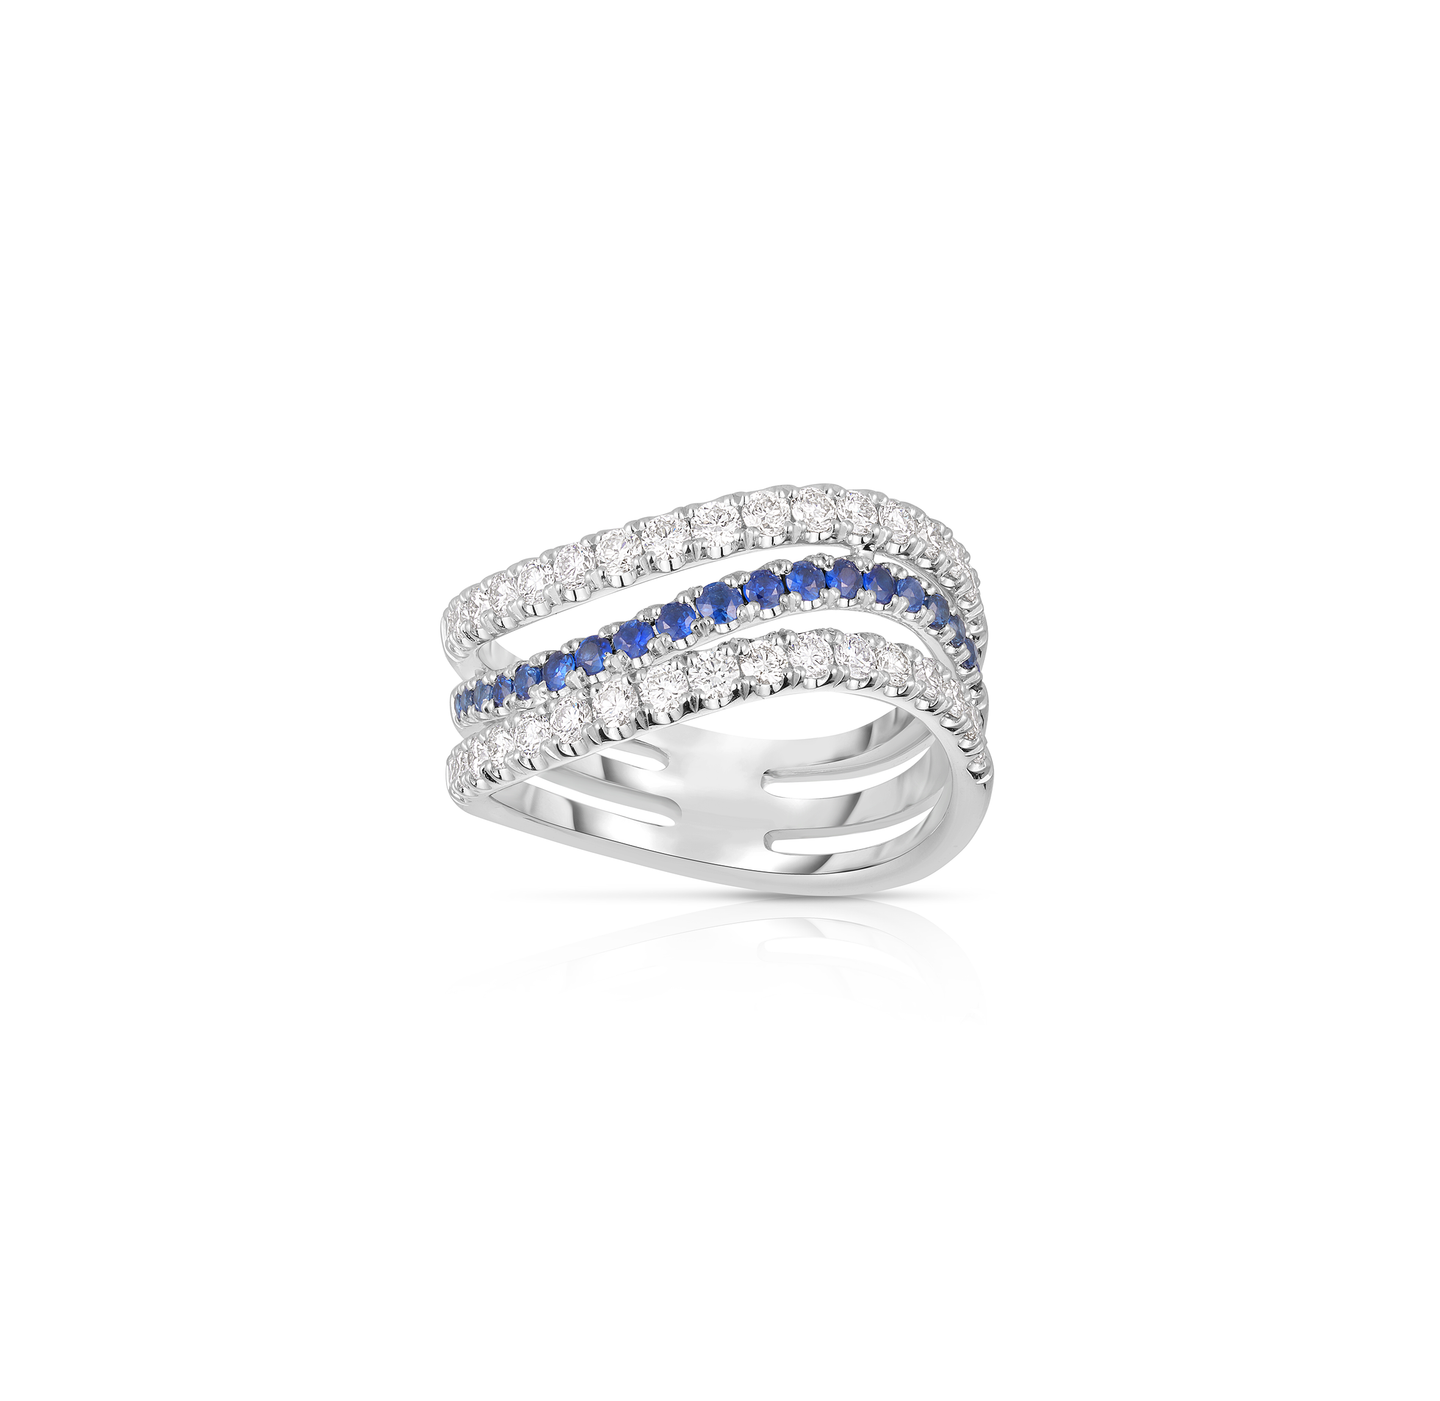 Sabel Collection White Gold 3 Row Diamond and Sapphire Wavy Ring